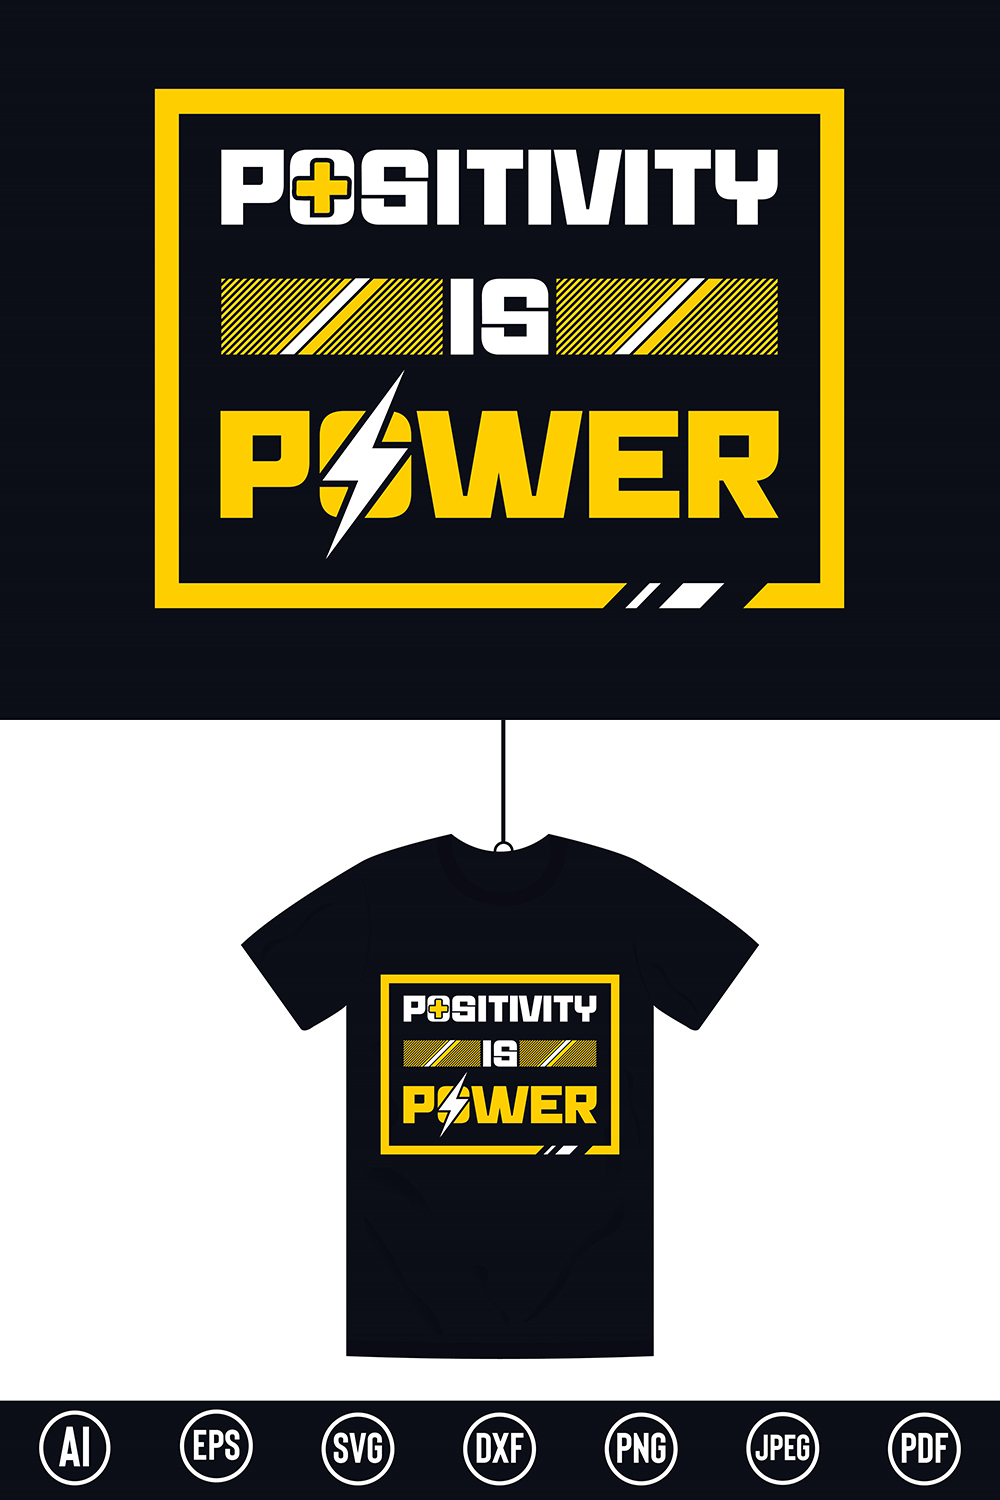 Modern Inspirational Typography T-Shirt design with “Positivity is Power” quote for t-shirt, posters, stickers, mug prints, banners, gift cards, labels etc pinterest preview image.